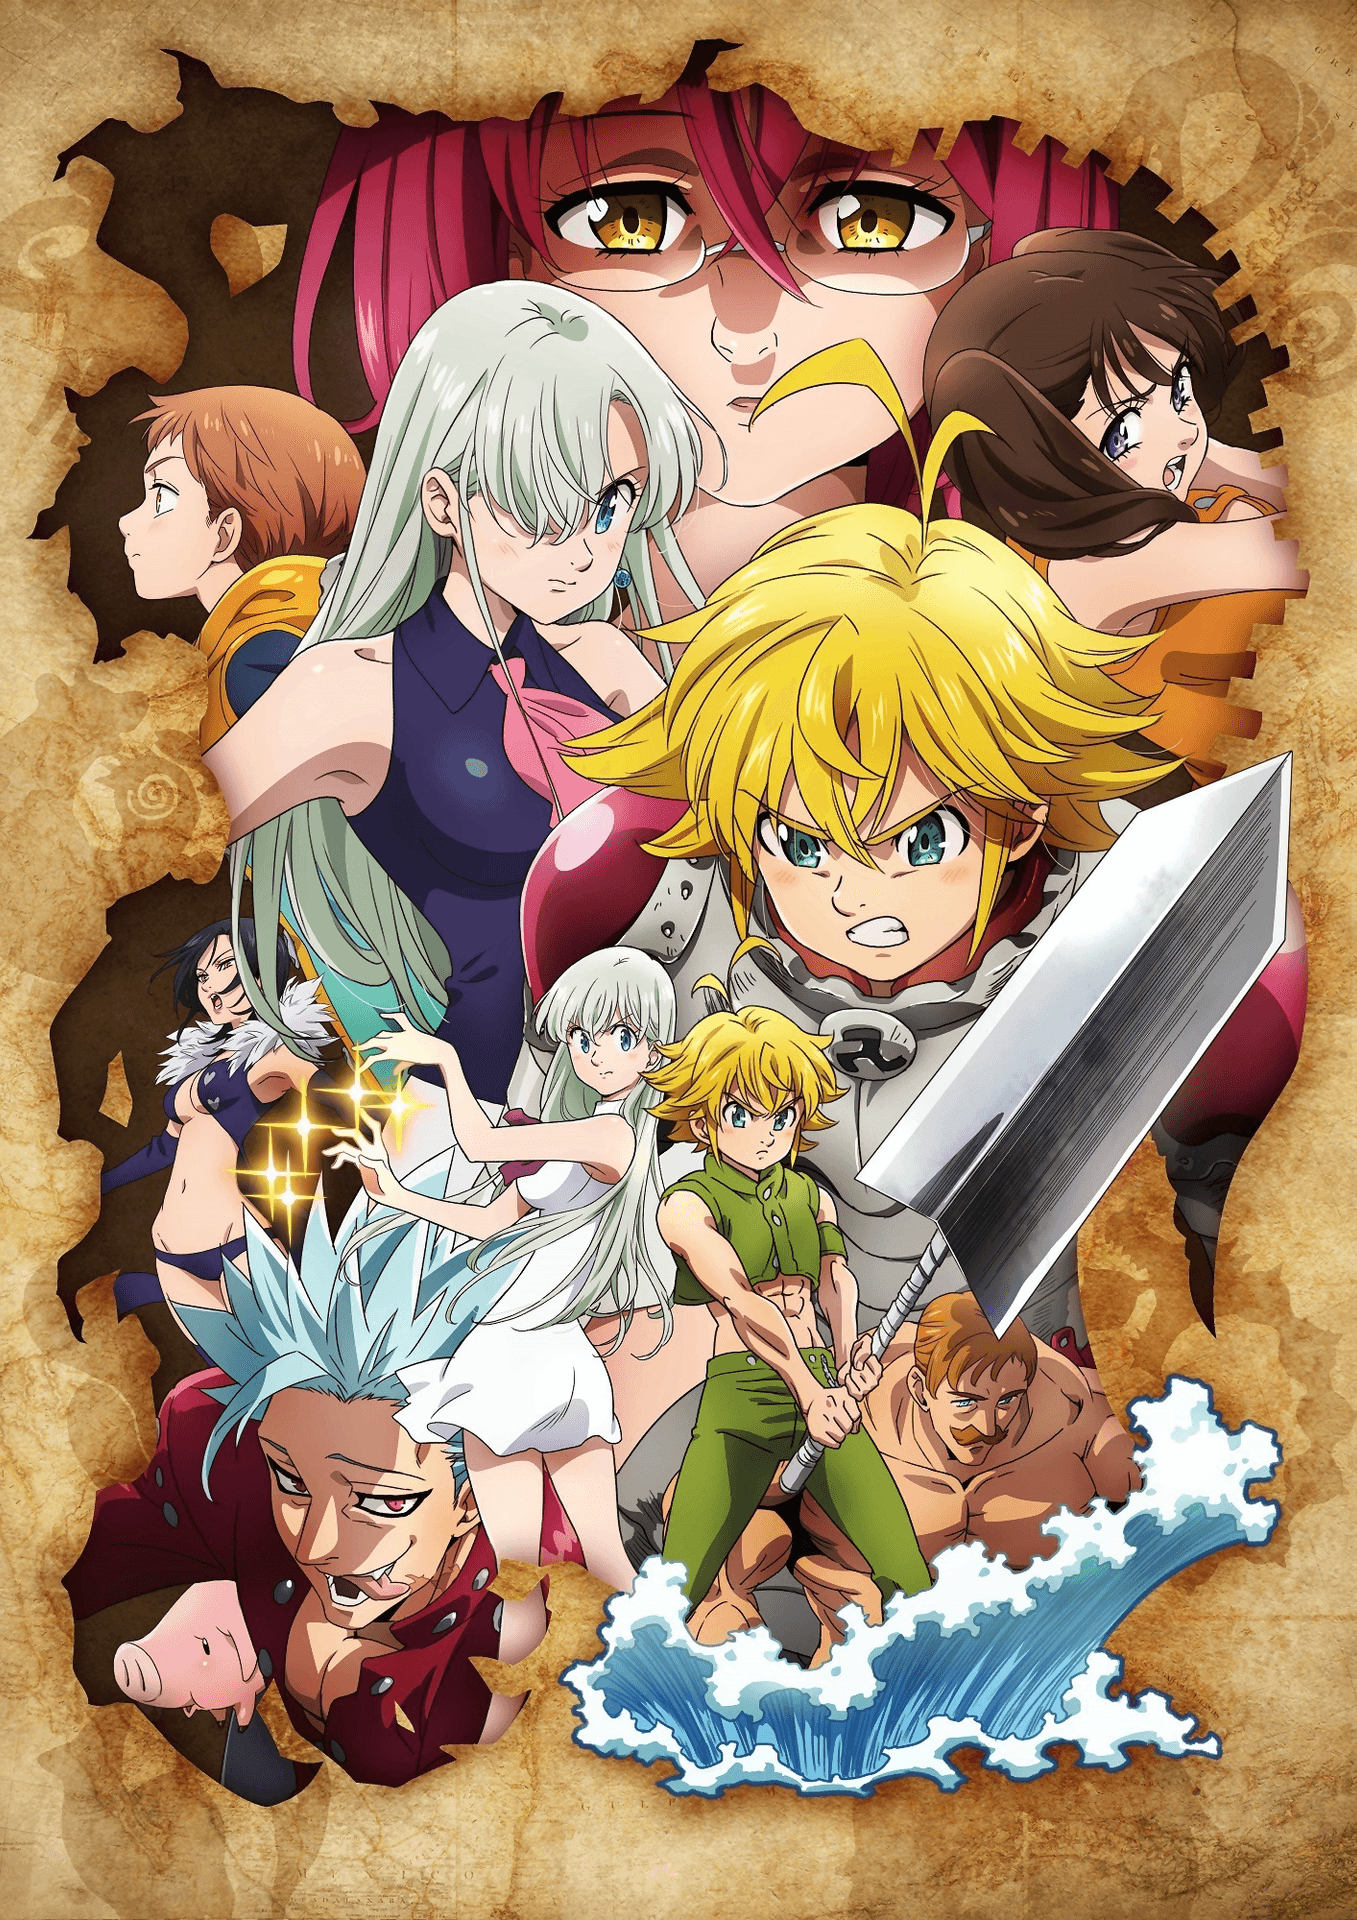 Epic Battle Scene From The Seven Deadly Sins Animated Series Wallpaper